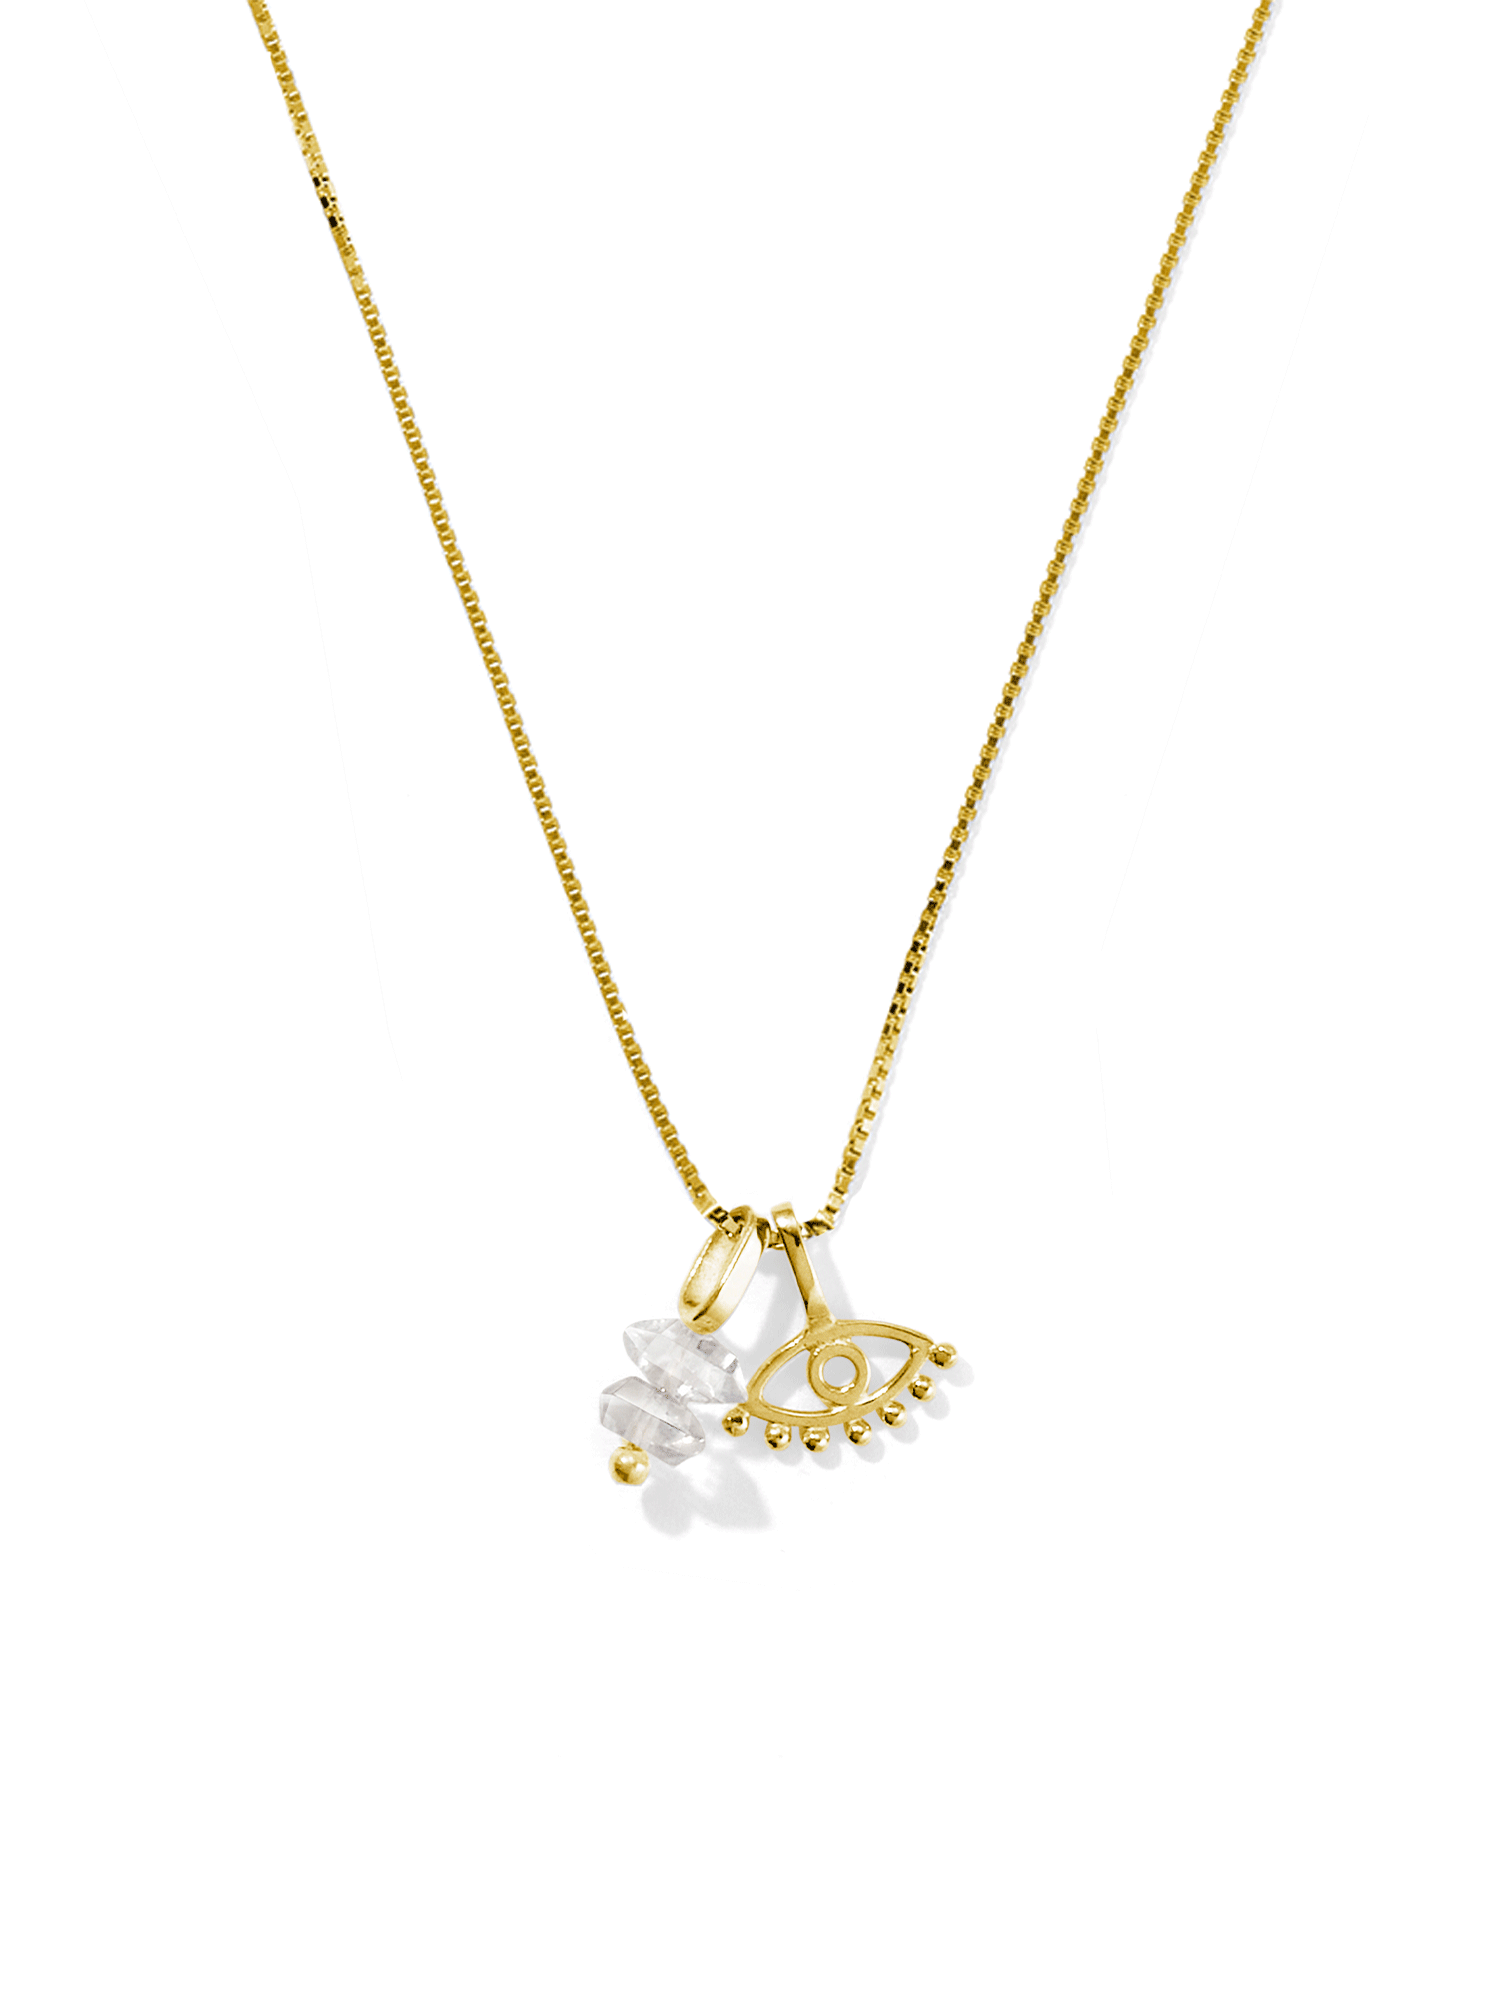 astral charm necklace | herkimer